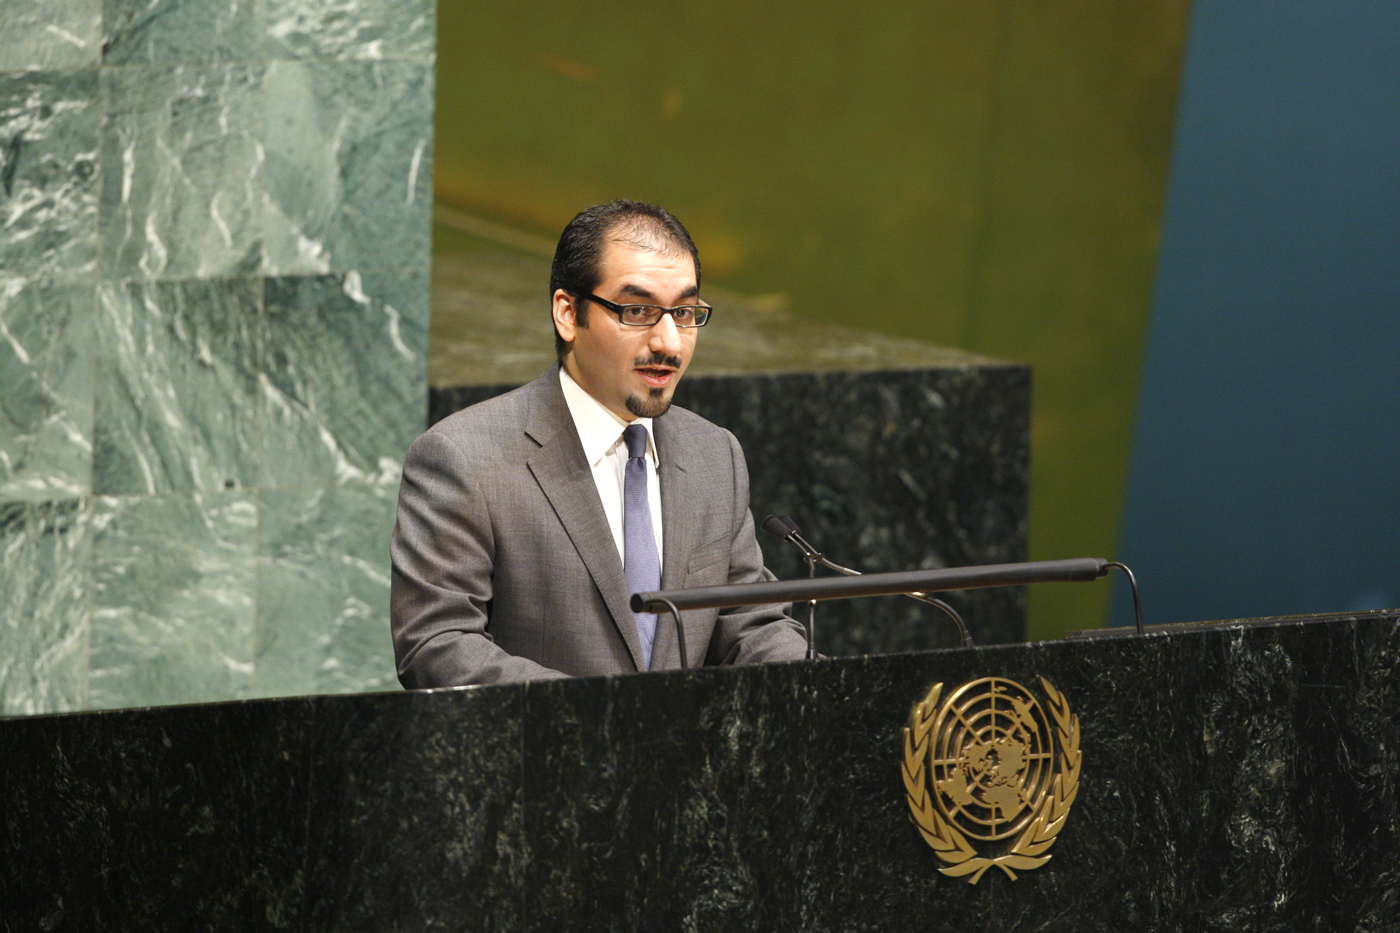 Third Secretary of the Permanent Mission of Kuwait to the UN Hassan Shaker Abu Al-Hassan